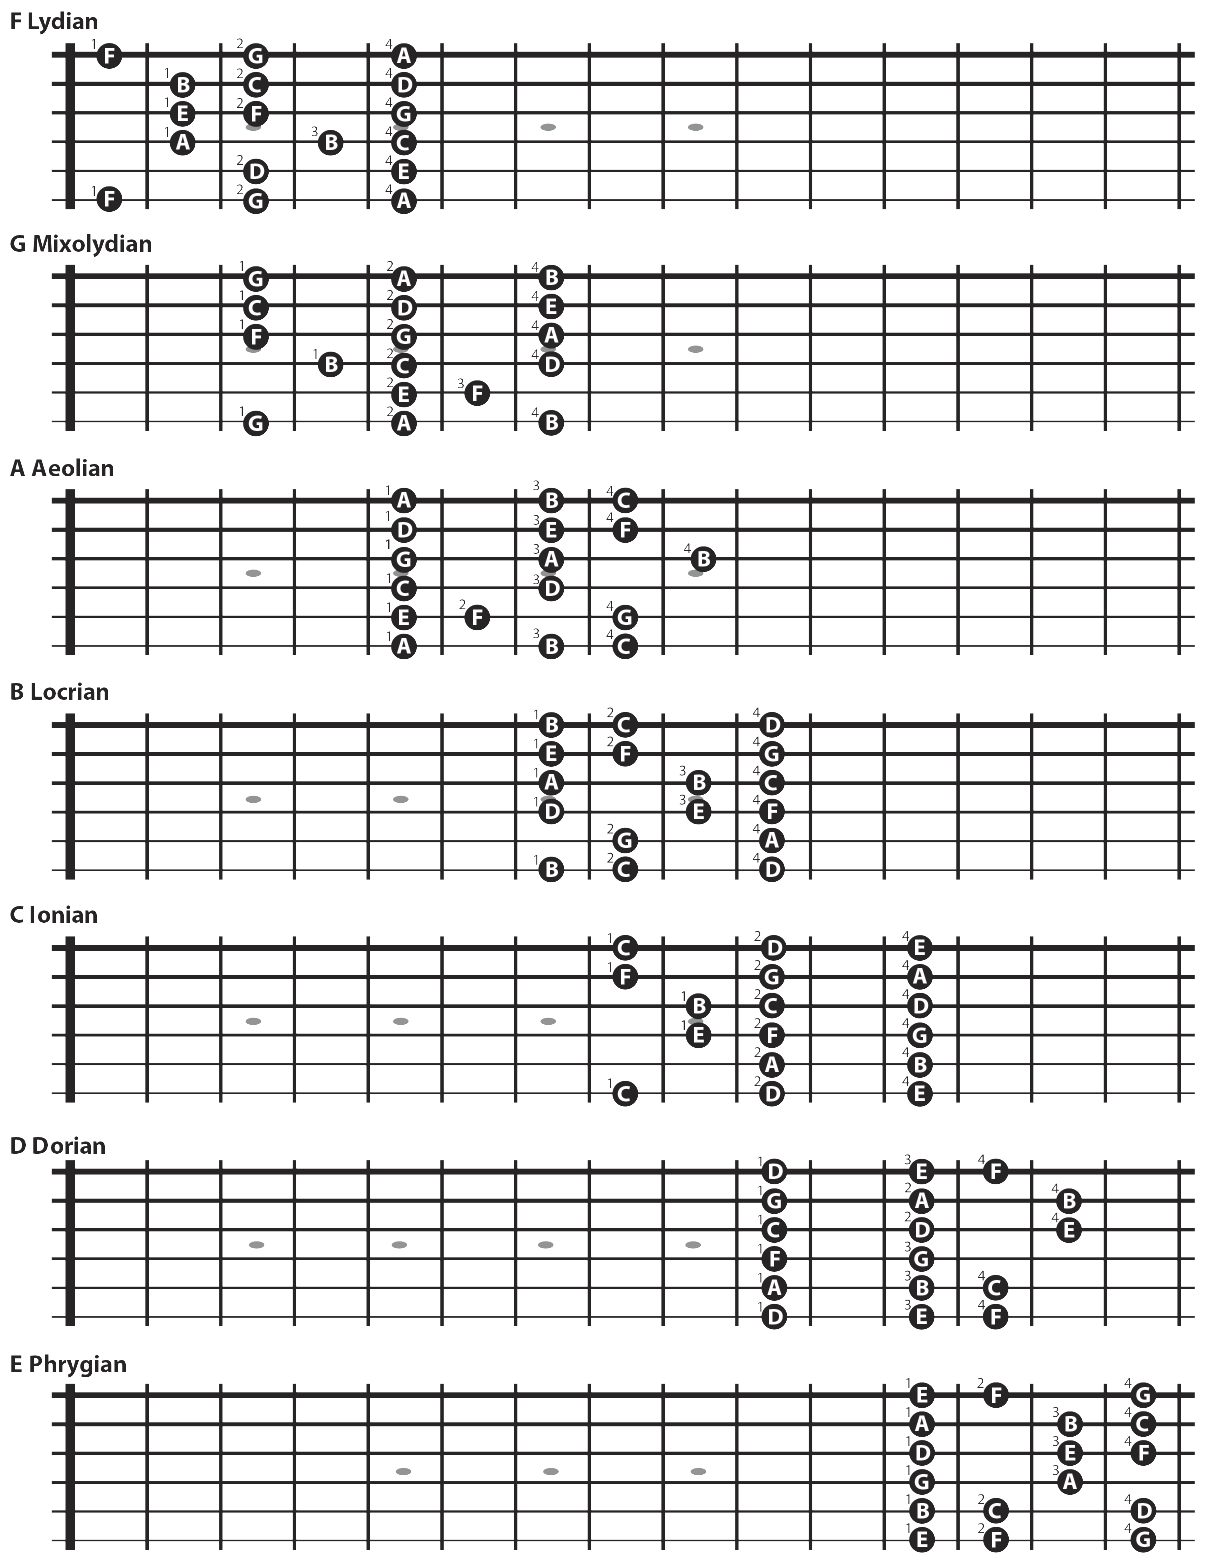 The 7 in-positoin major scale fingerings on a guitar